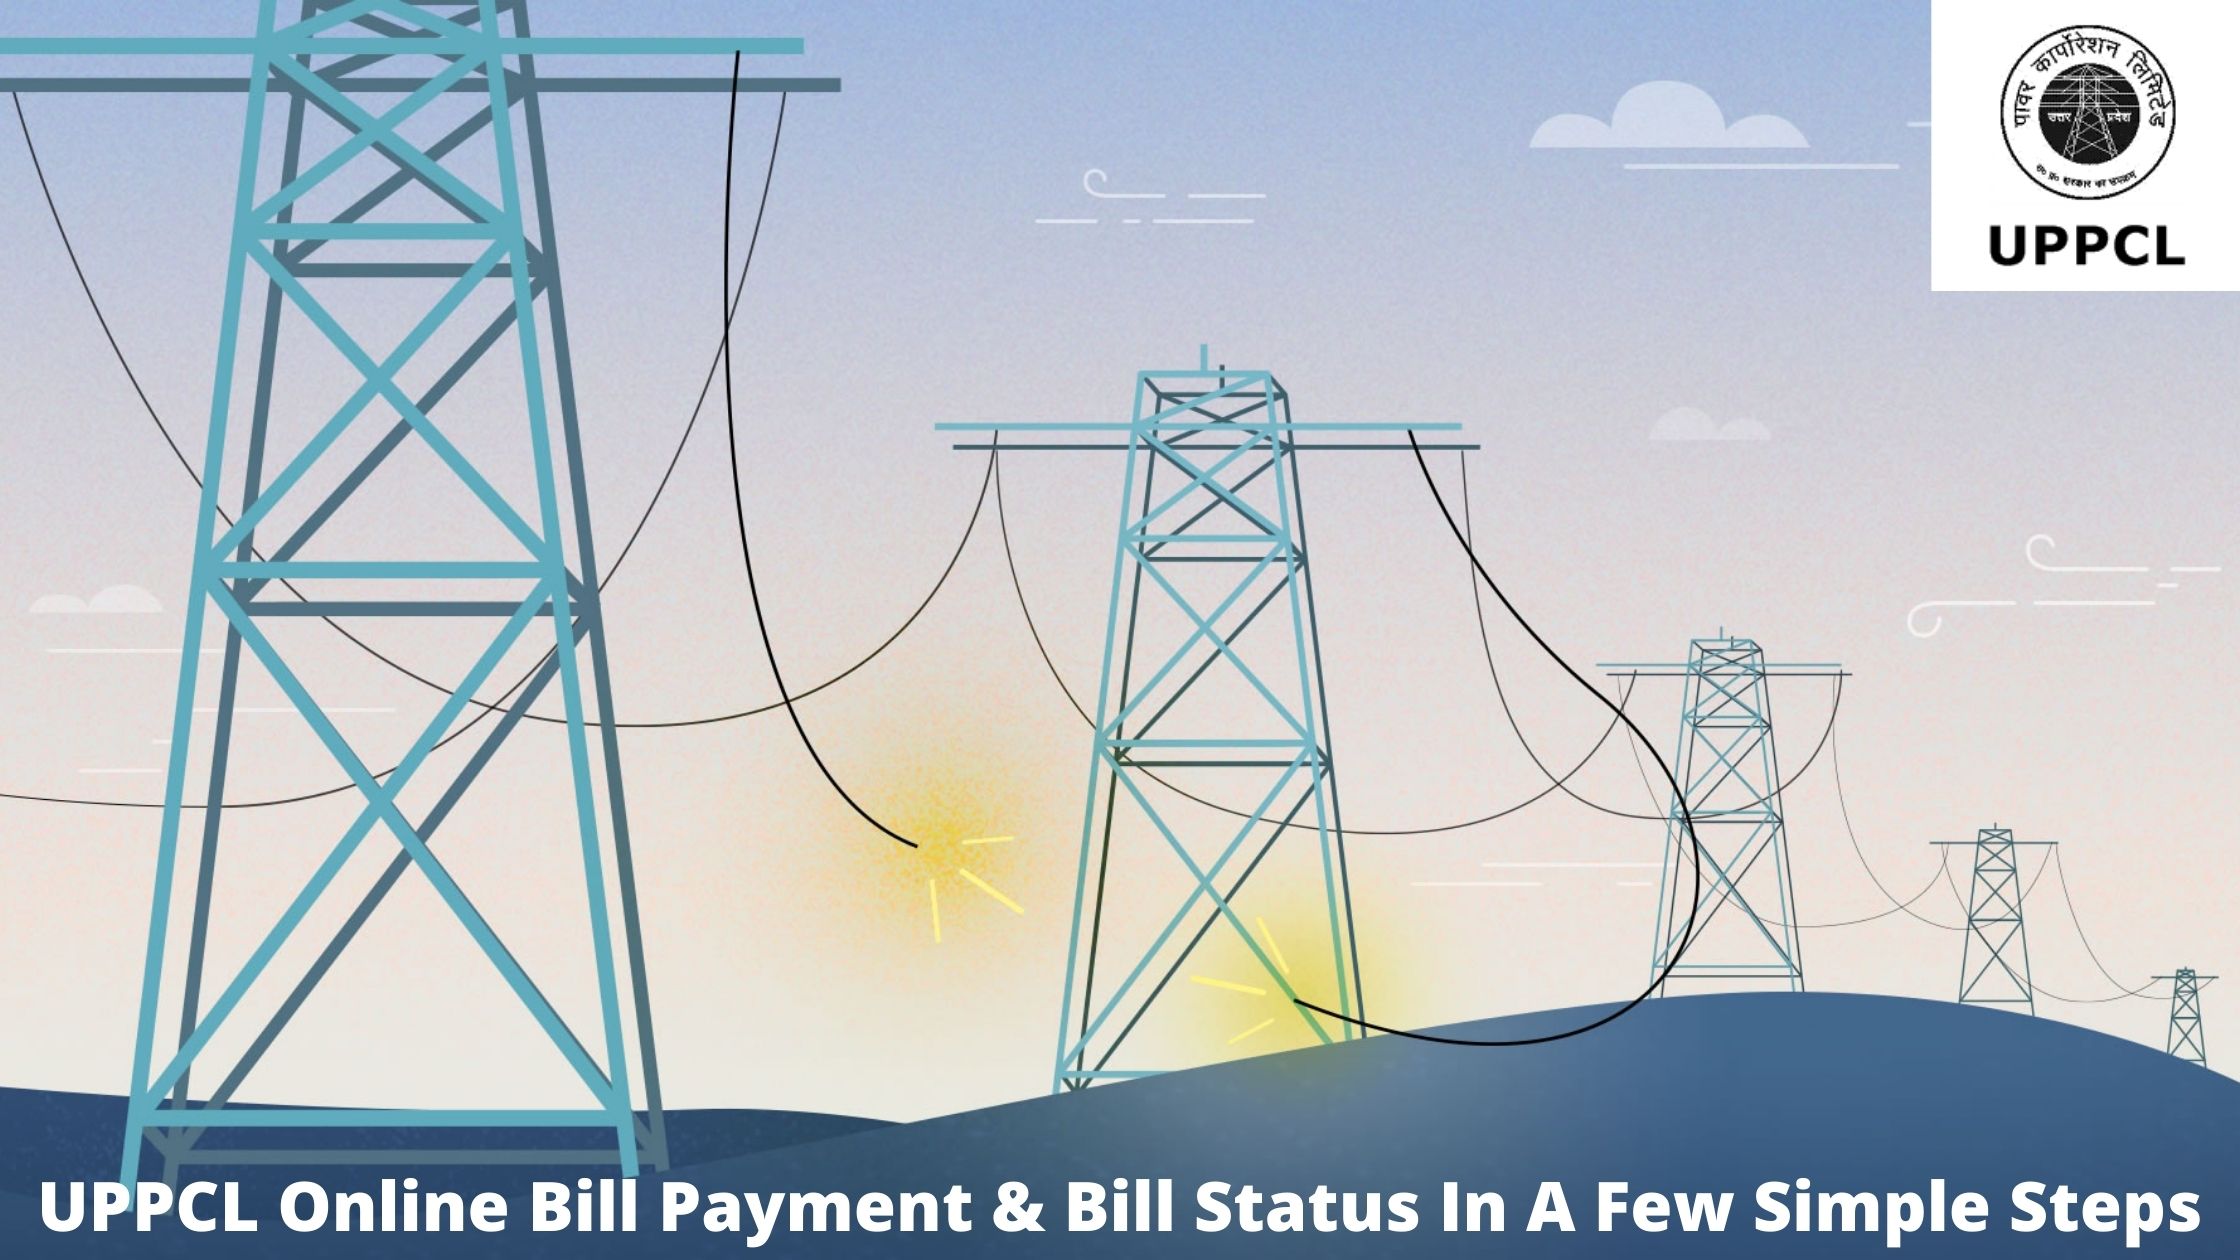  UPPCL Online Bill Payment & Bill Status in A Few Simple Steps